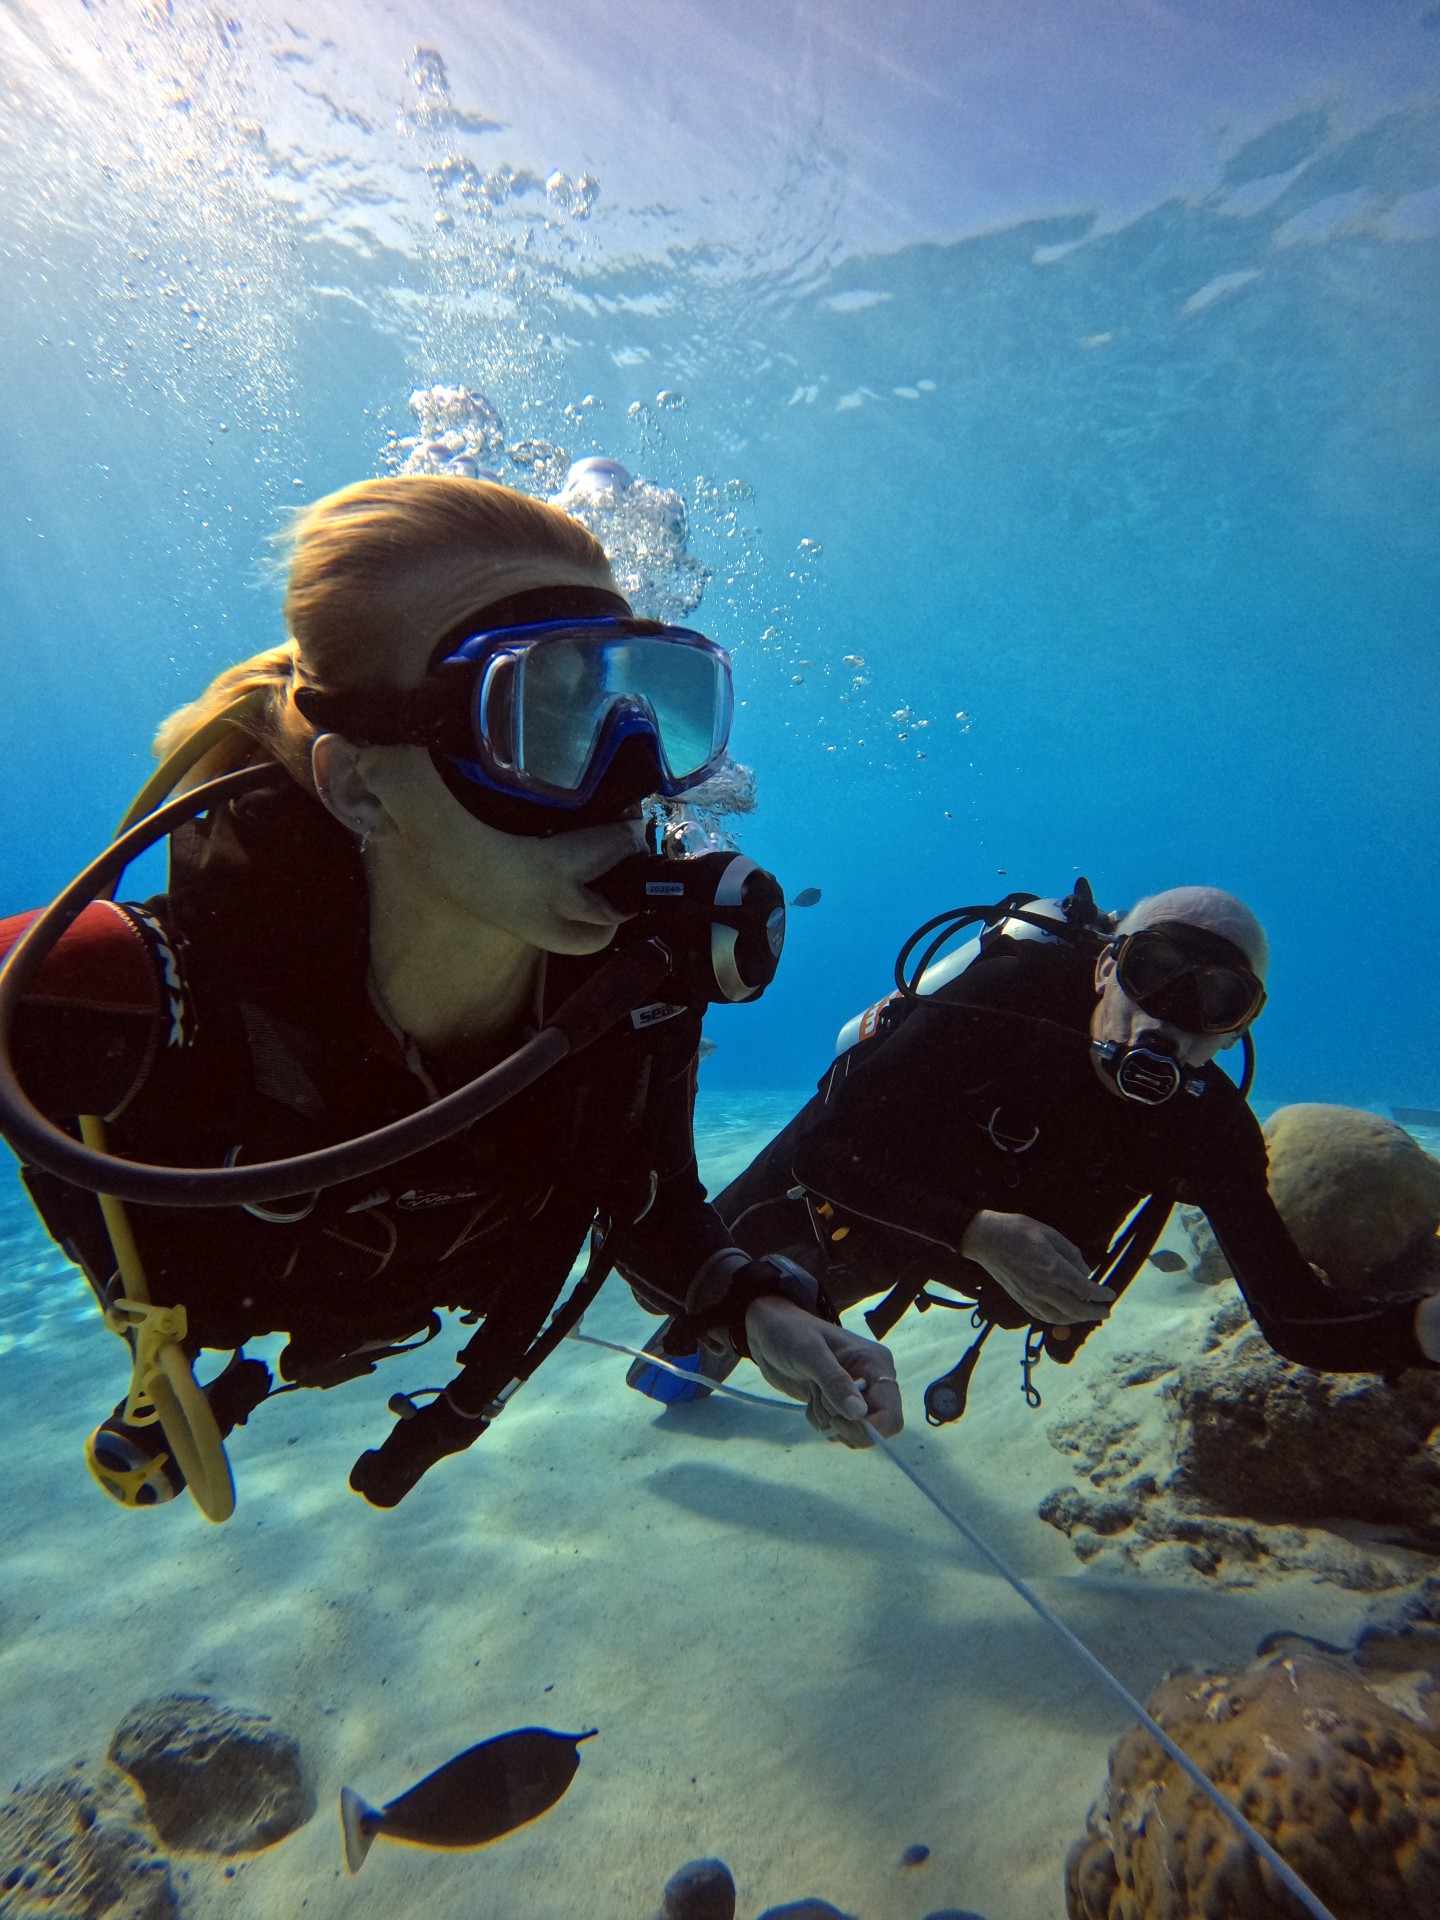 Beginners Guide to Scuba Diving